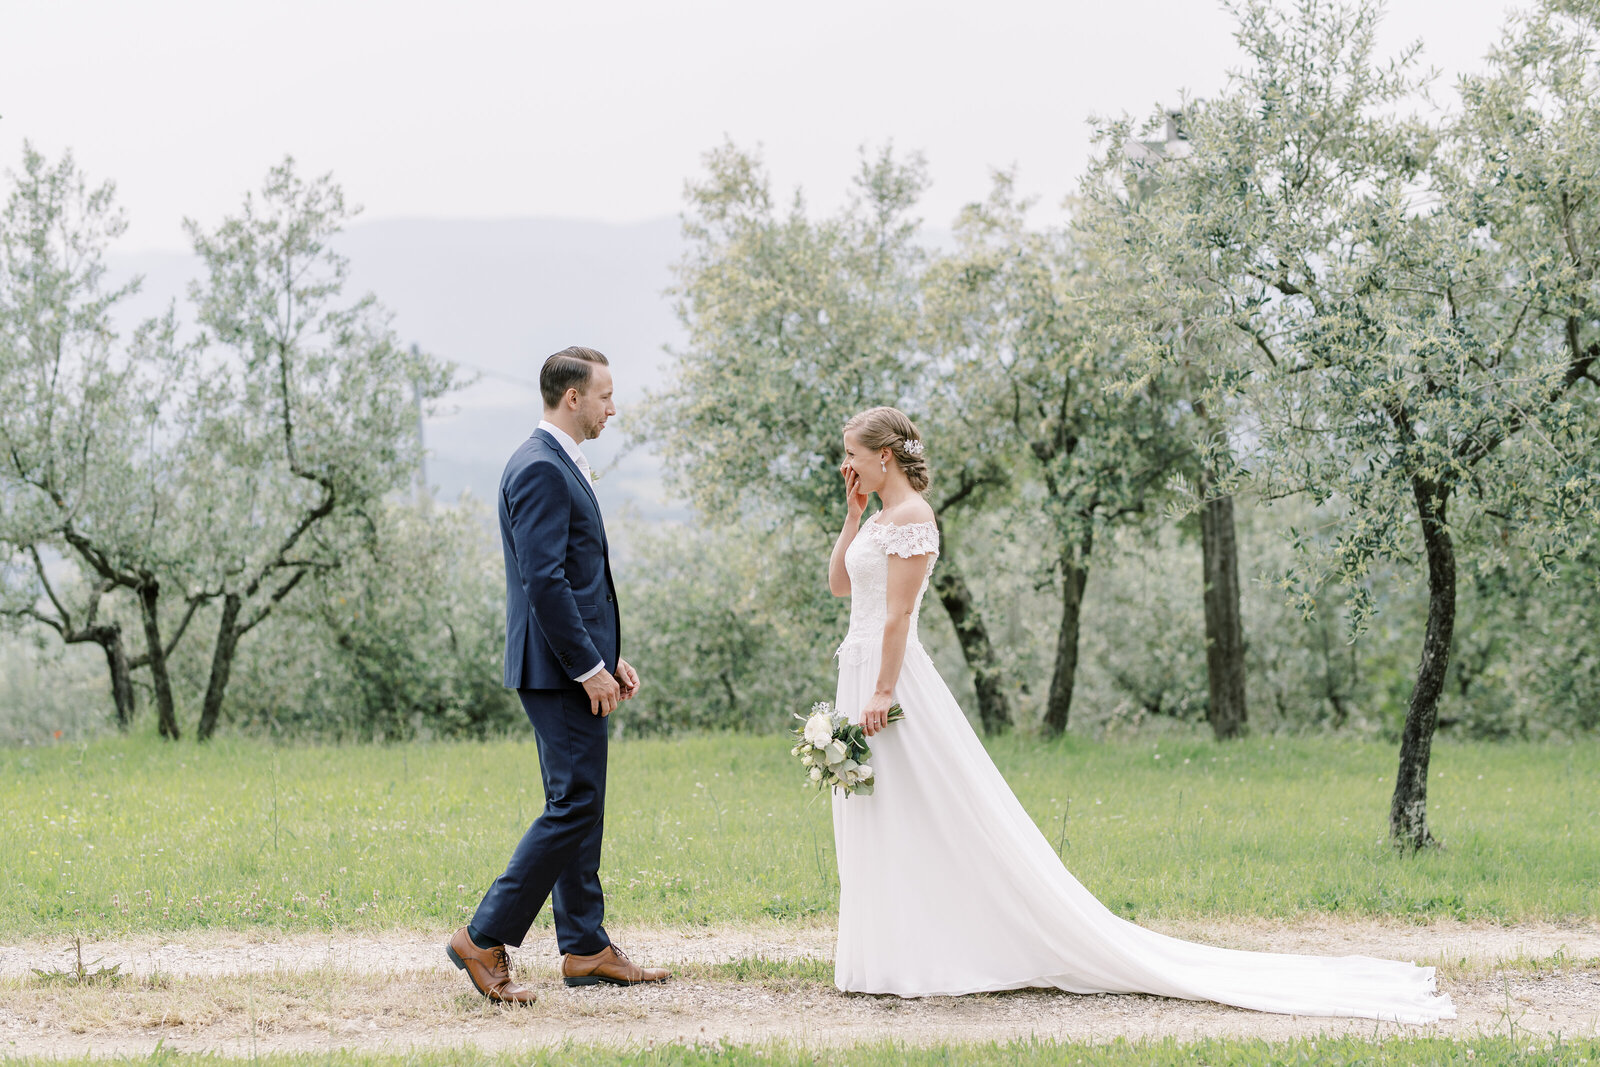 First look in the olive groovs of Tuscany